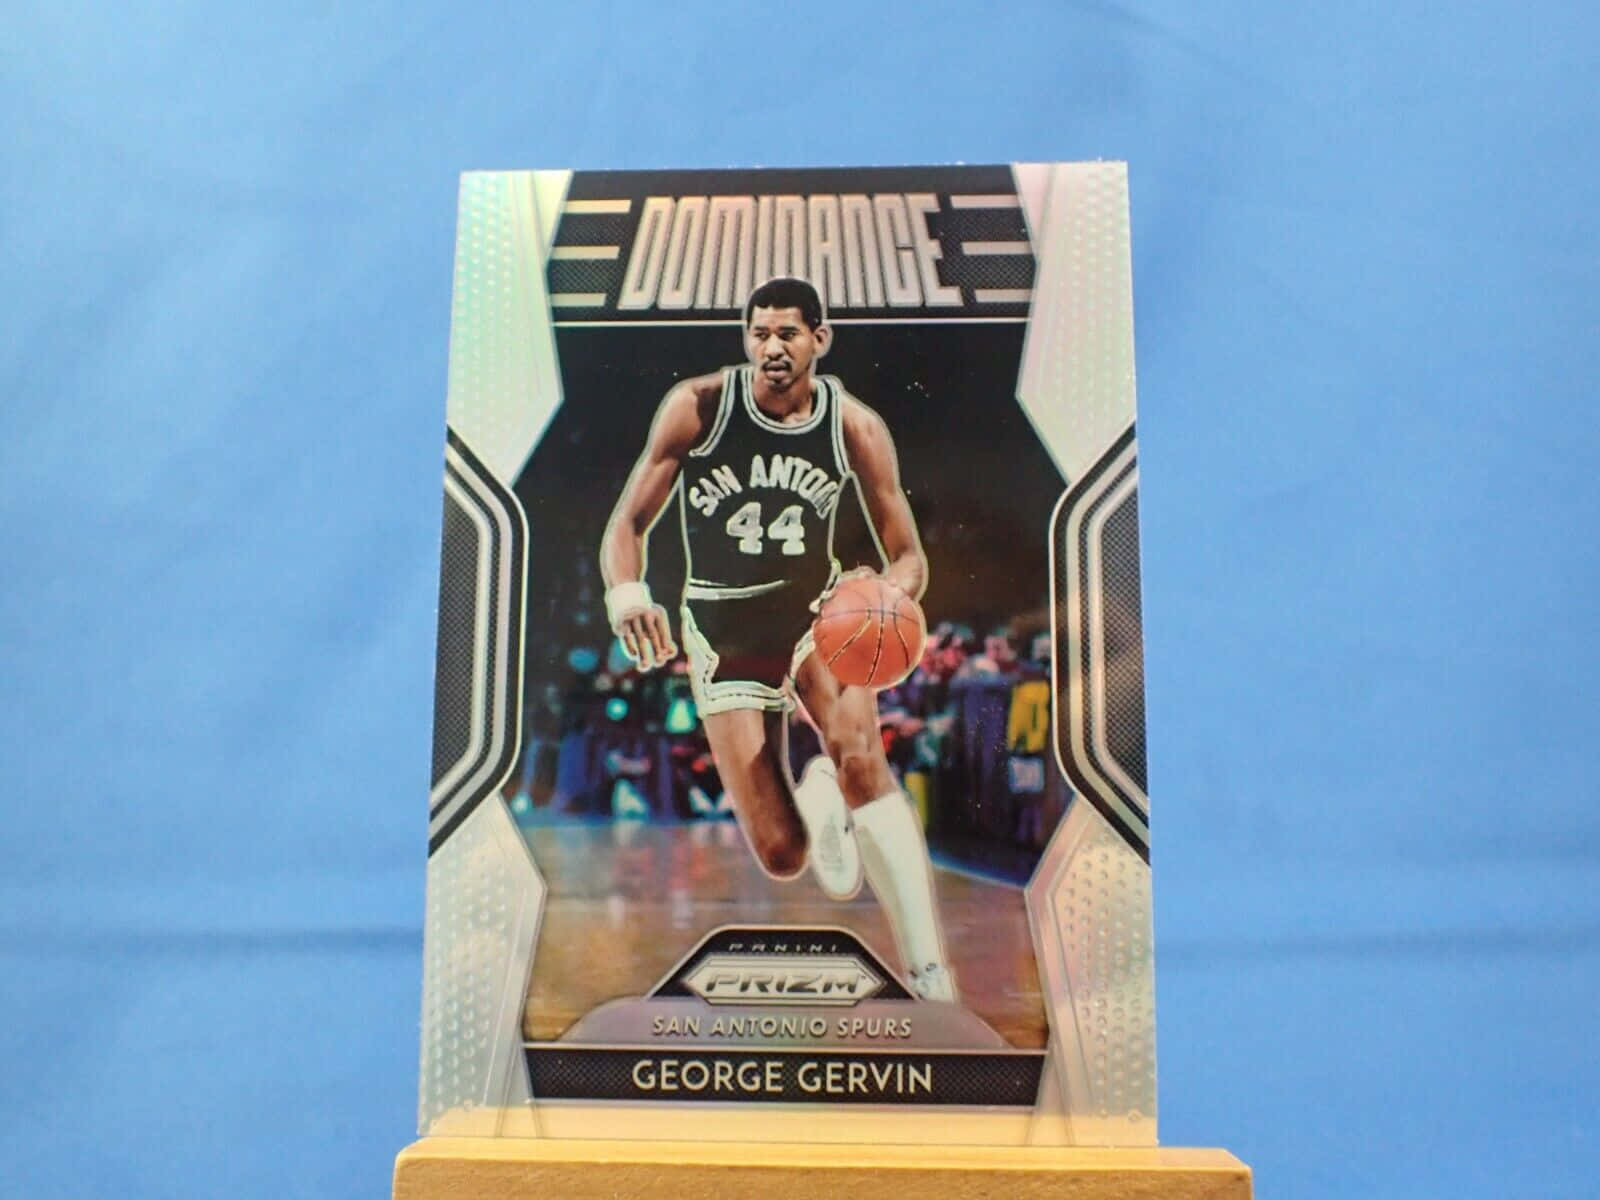 Iconic Collectible Card of Basketball Legend George Gervin Wallpaper